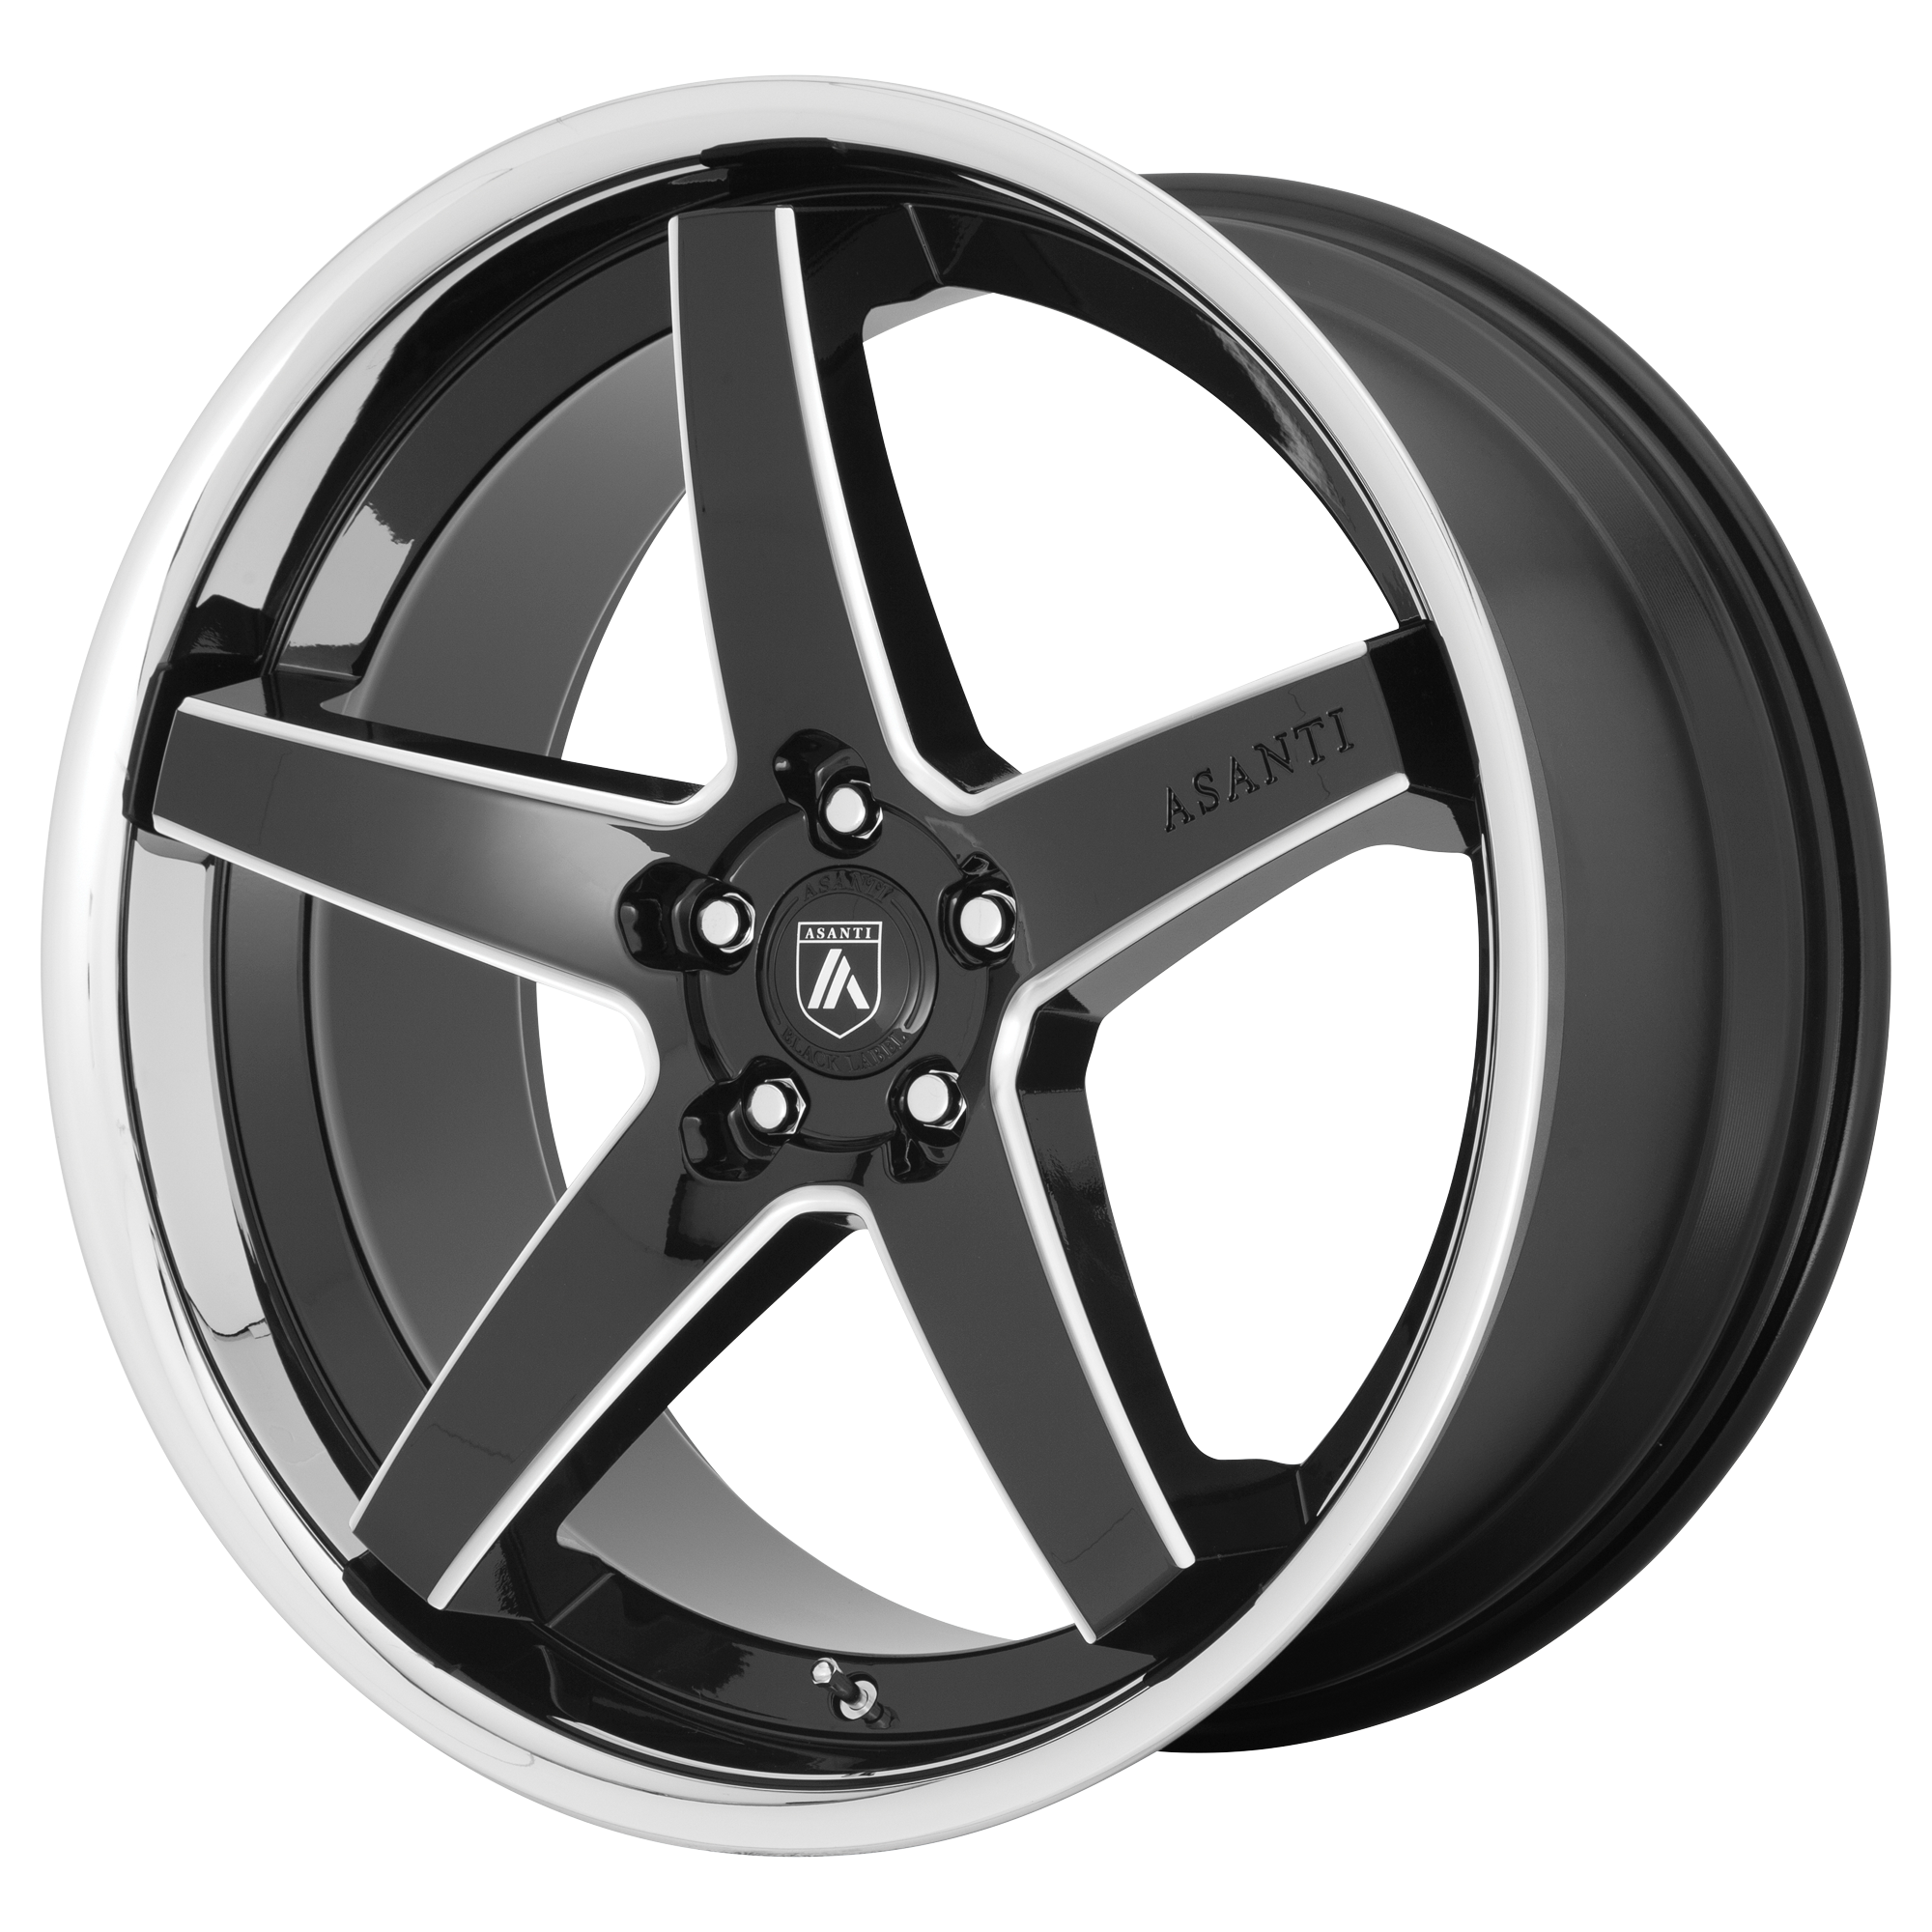 REGAL 20x10.5 5x120.00 GLOSS BLACK MILLED W/ CHROME LIP (38 mm) - Tires and Engine Performance